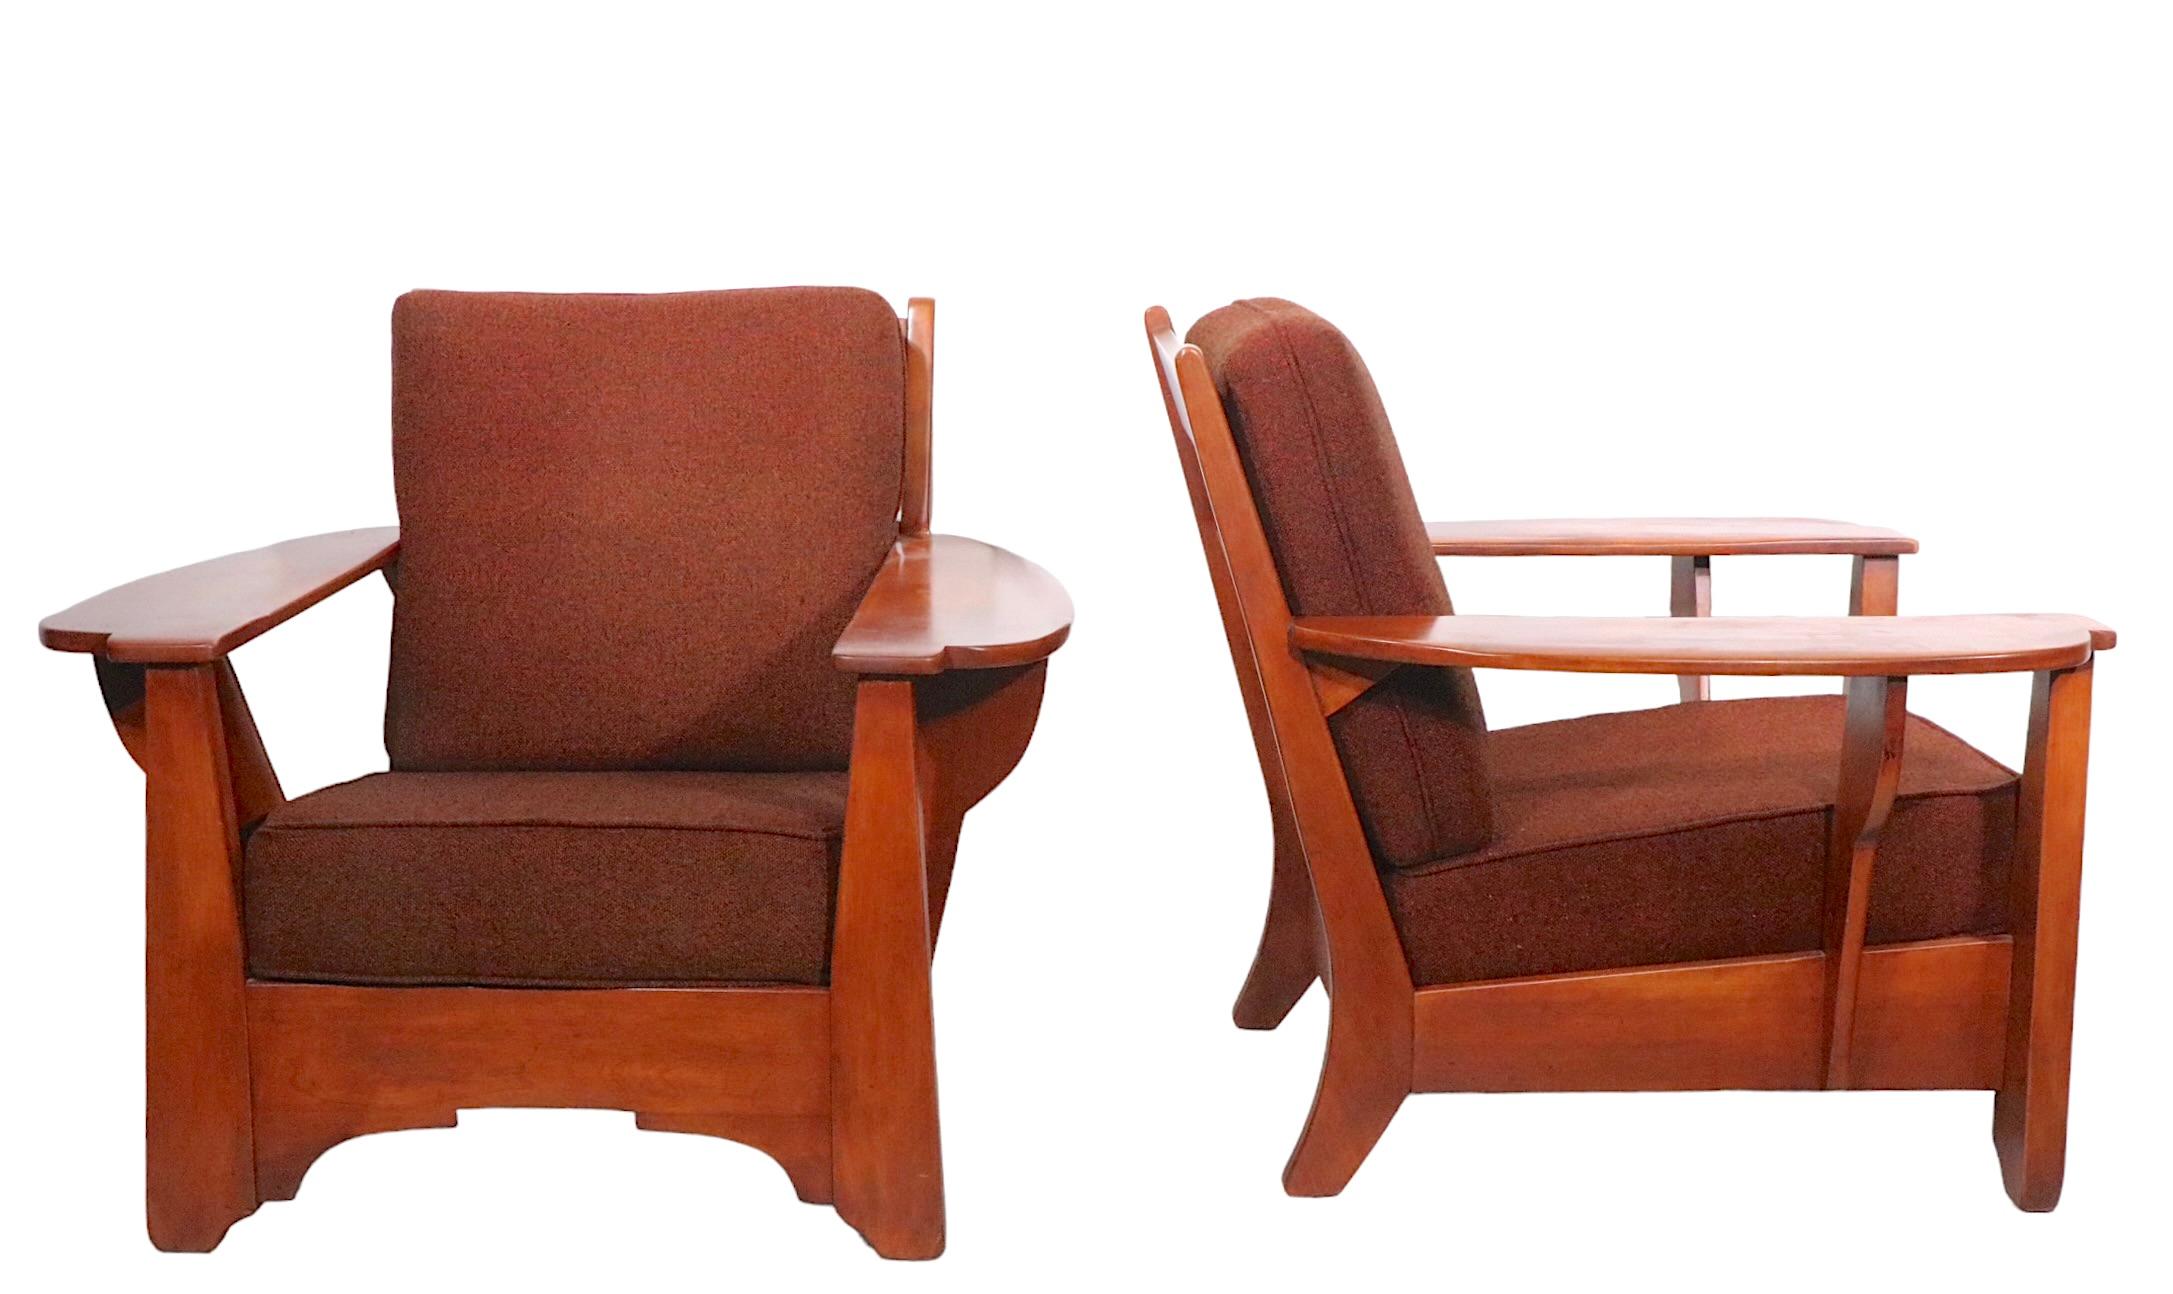 American Pr. Paddle Arm Lounge Chairs by Herman de Vries for Cushman Colonial, c 1940-50s